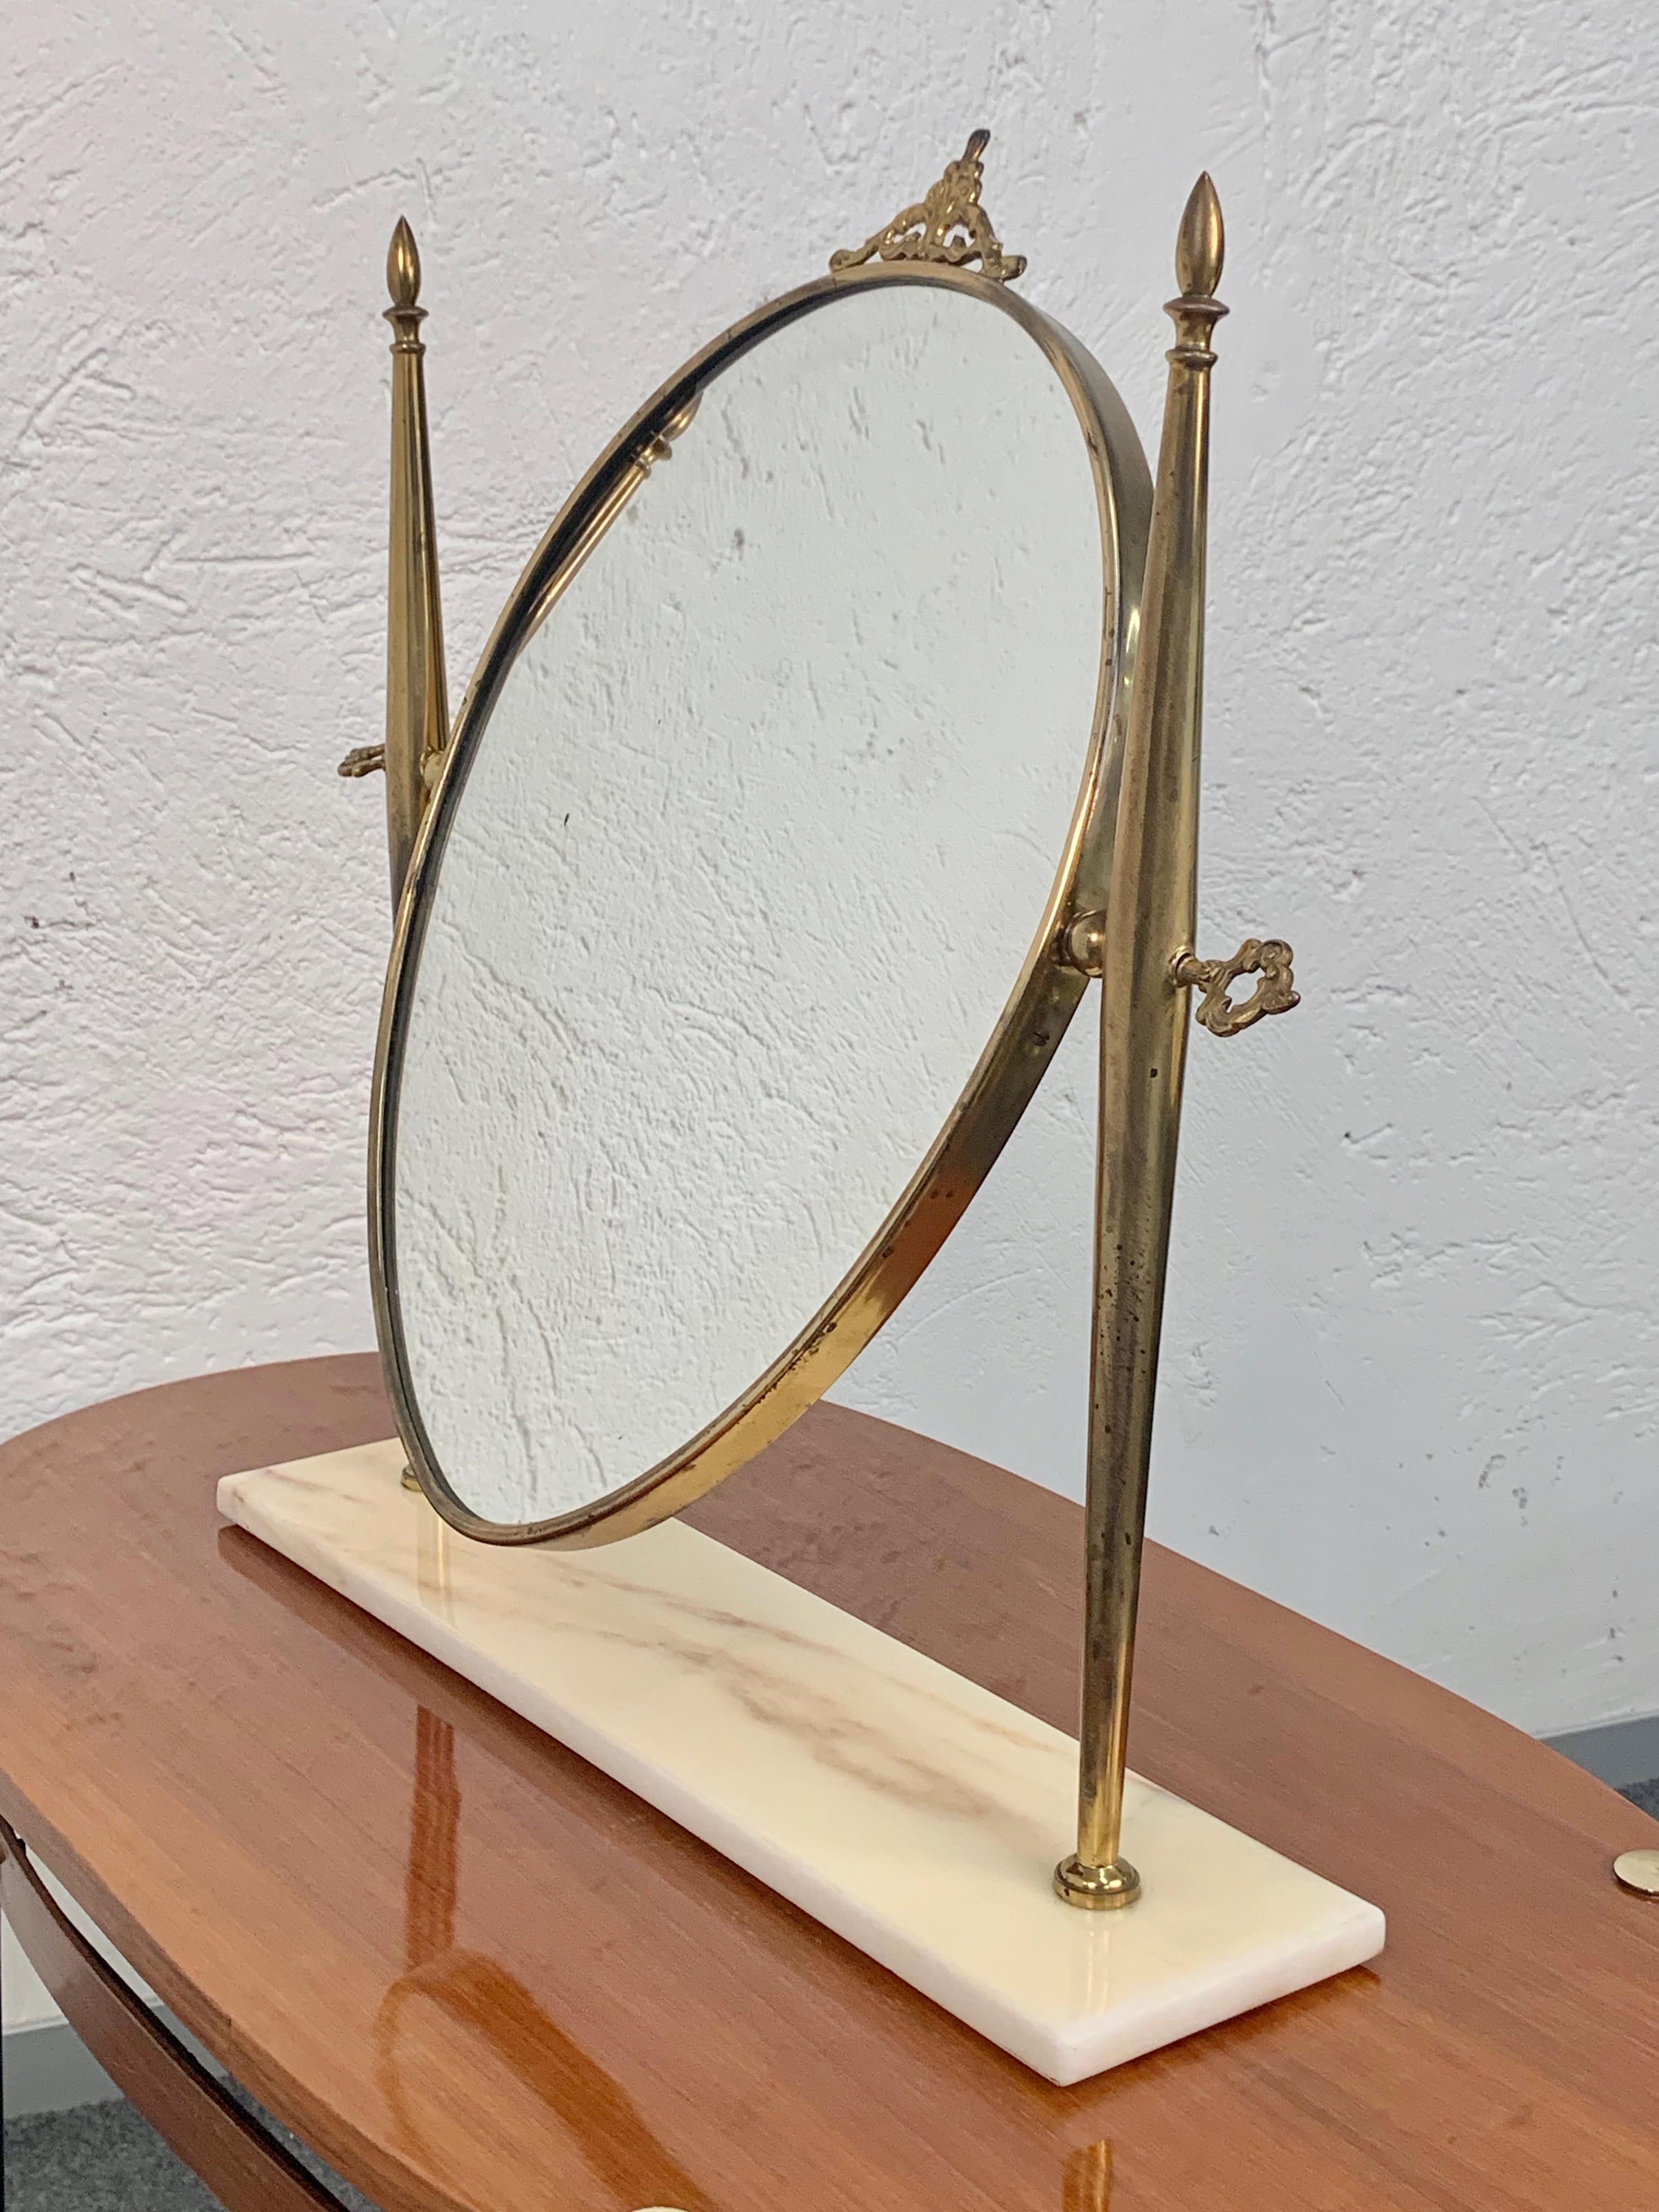 Italian Polished Brass Table Mirror with Marble Adjustable Vanity Base, 1950s For Sale 4